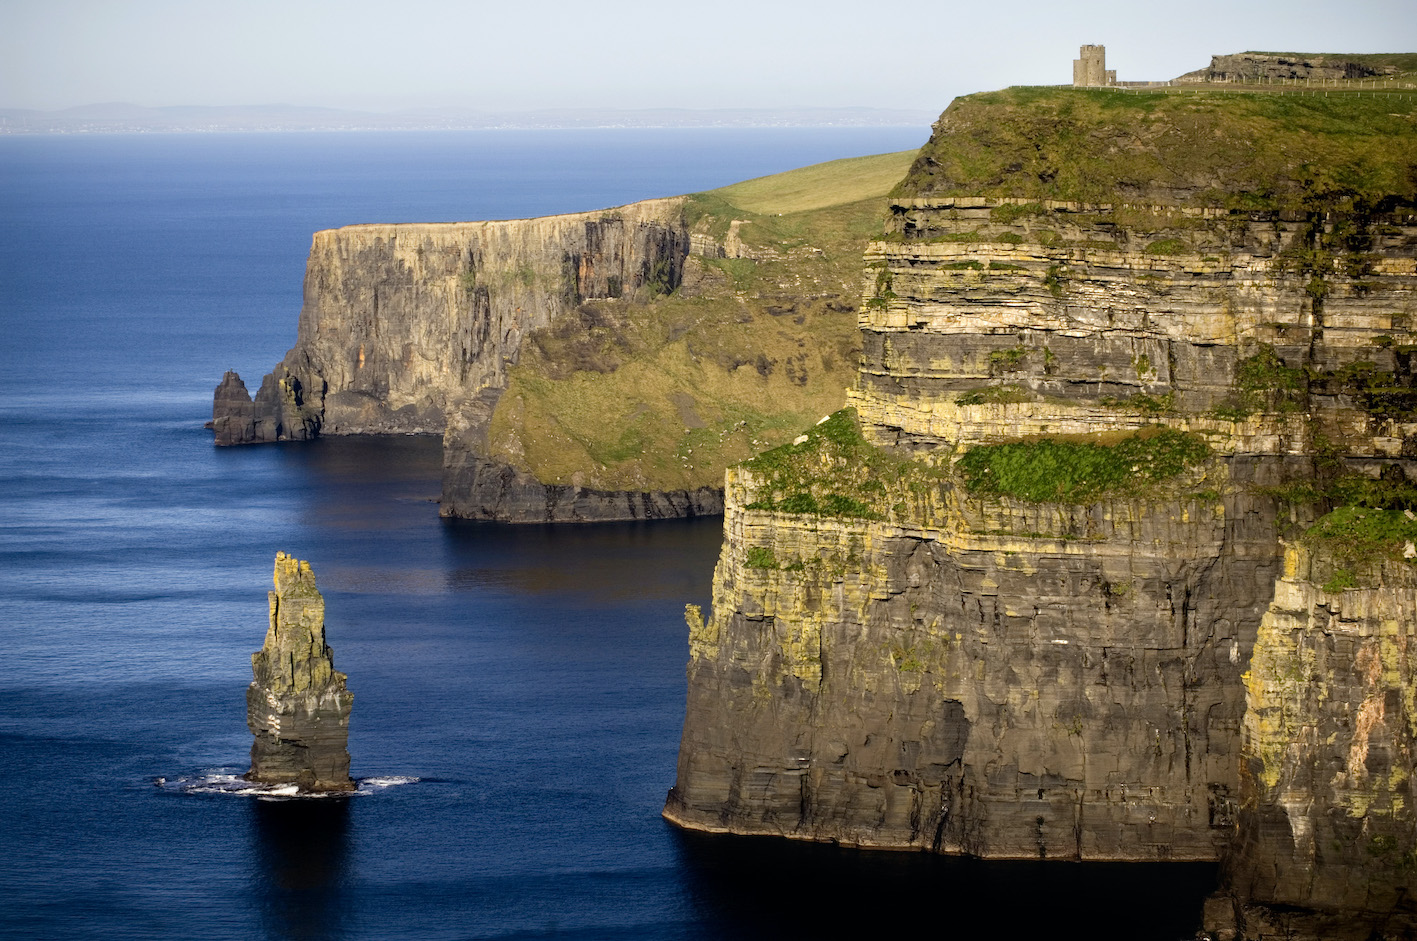 The stunningly gorgeous setting at Ireland's Cliffs of Moher. Photo by Tourism Ireland